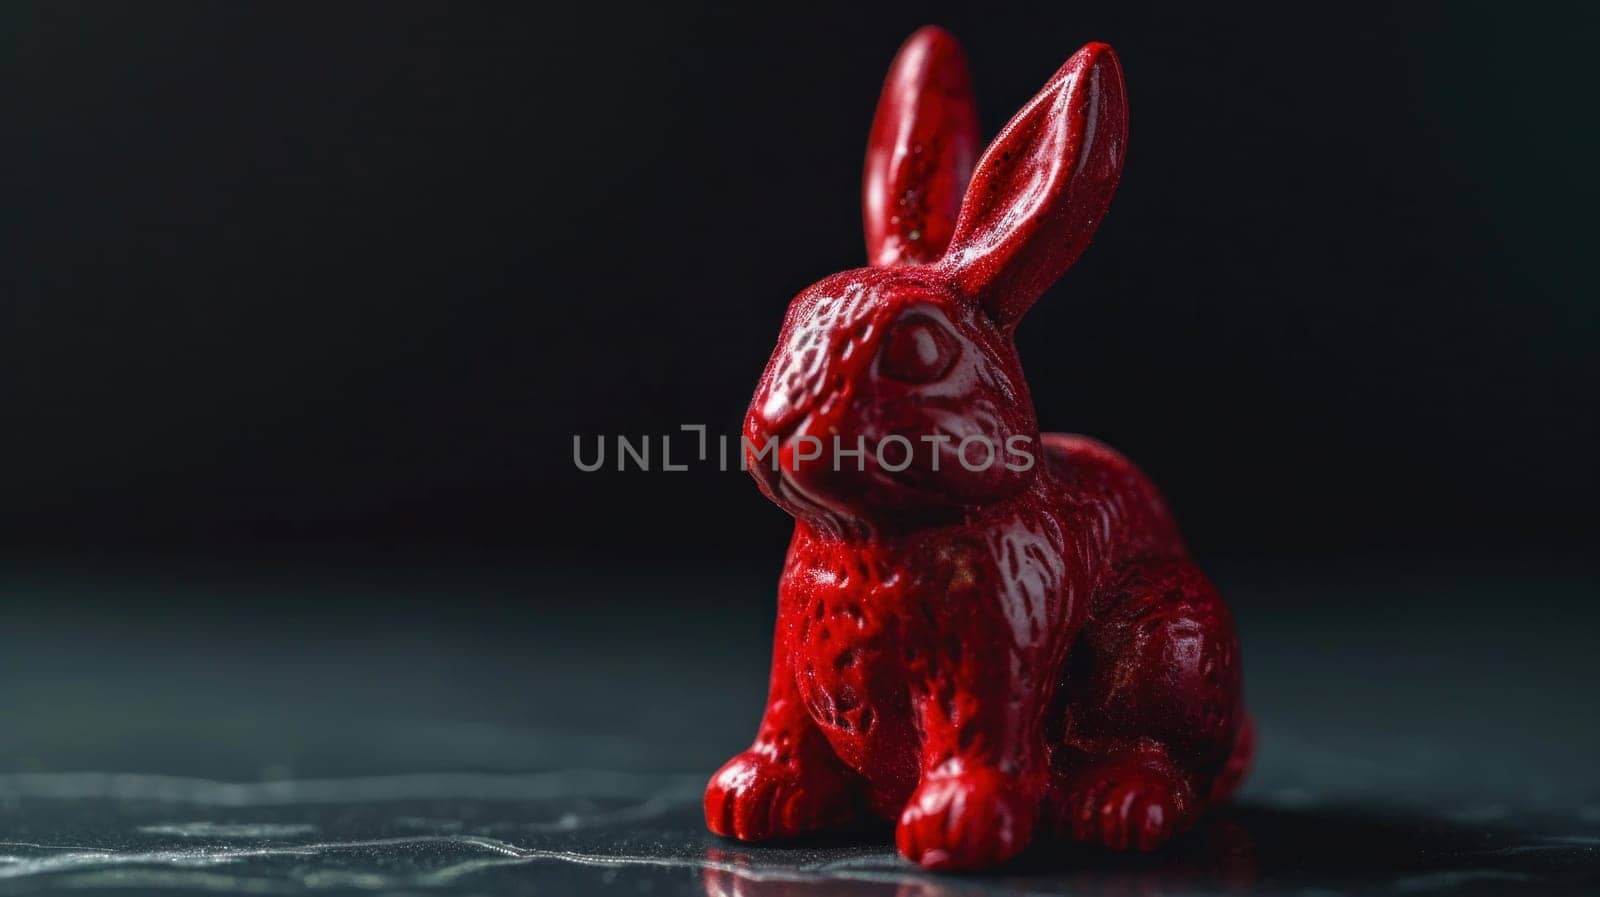 A red rabbit figurine sitting on a black surface